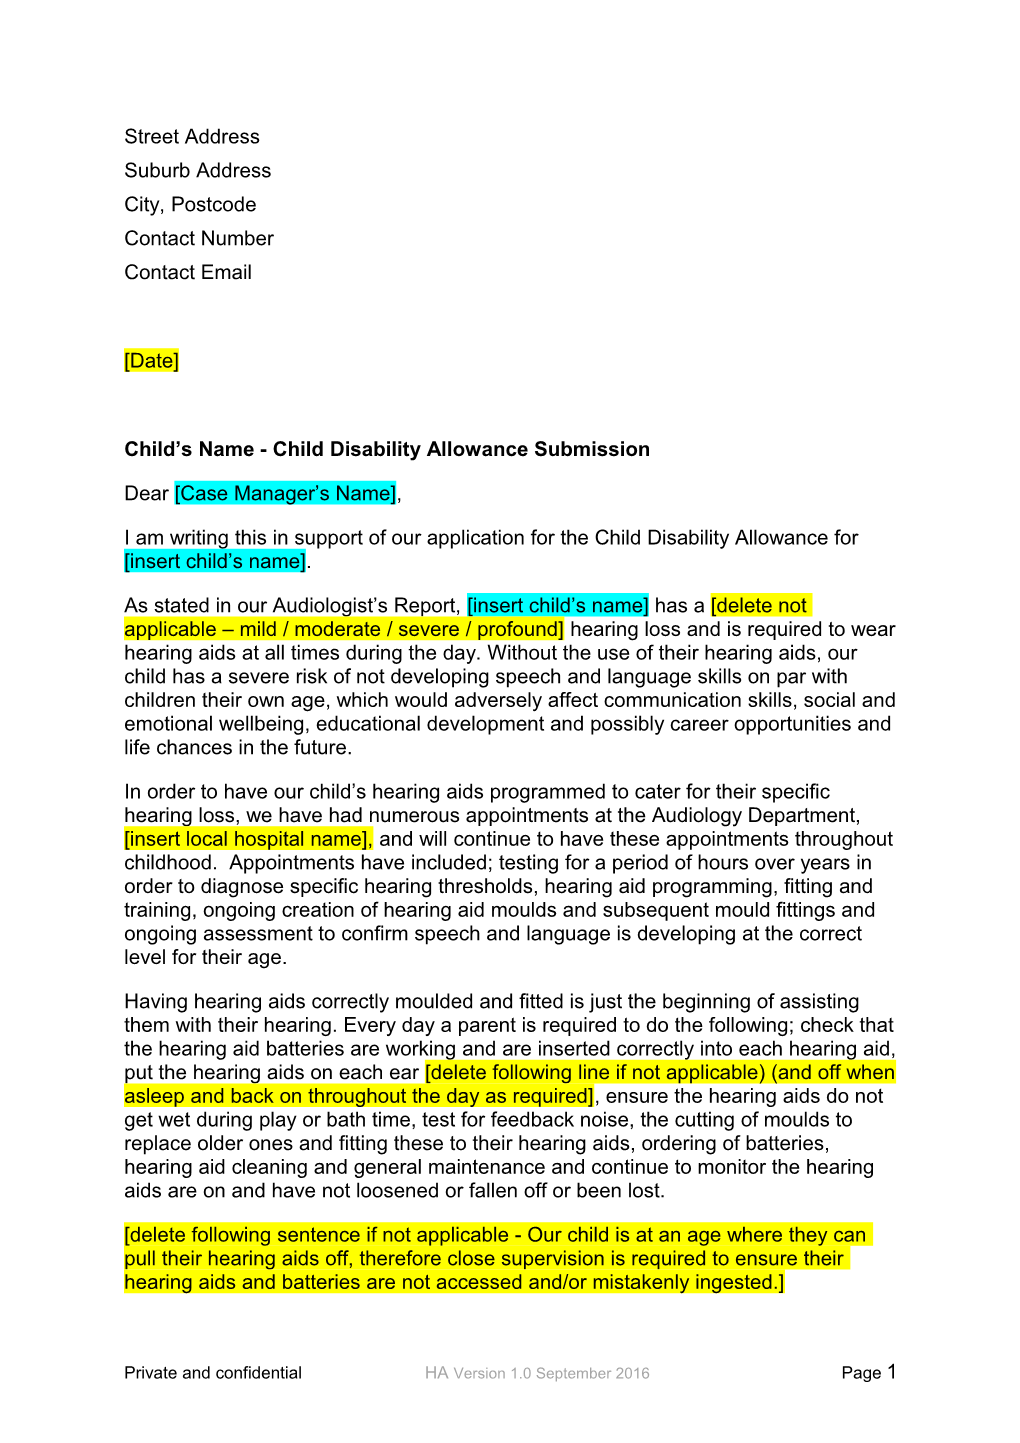 Standard Letter - Child Disability Allowance Submission for Hearing Aid(S)